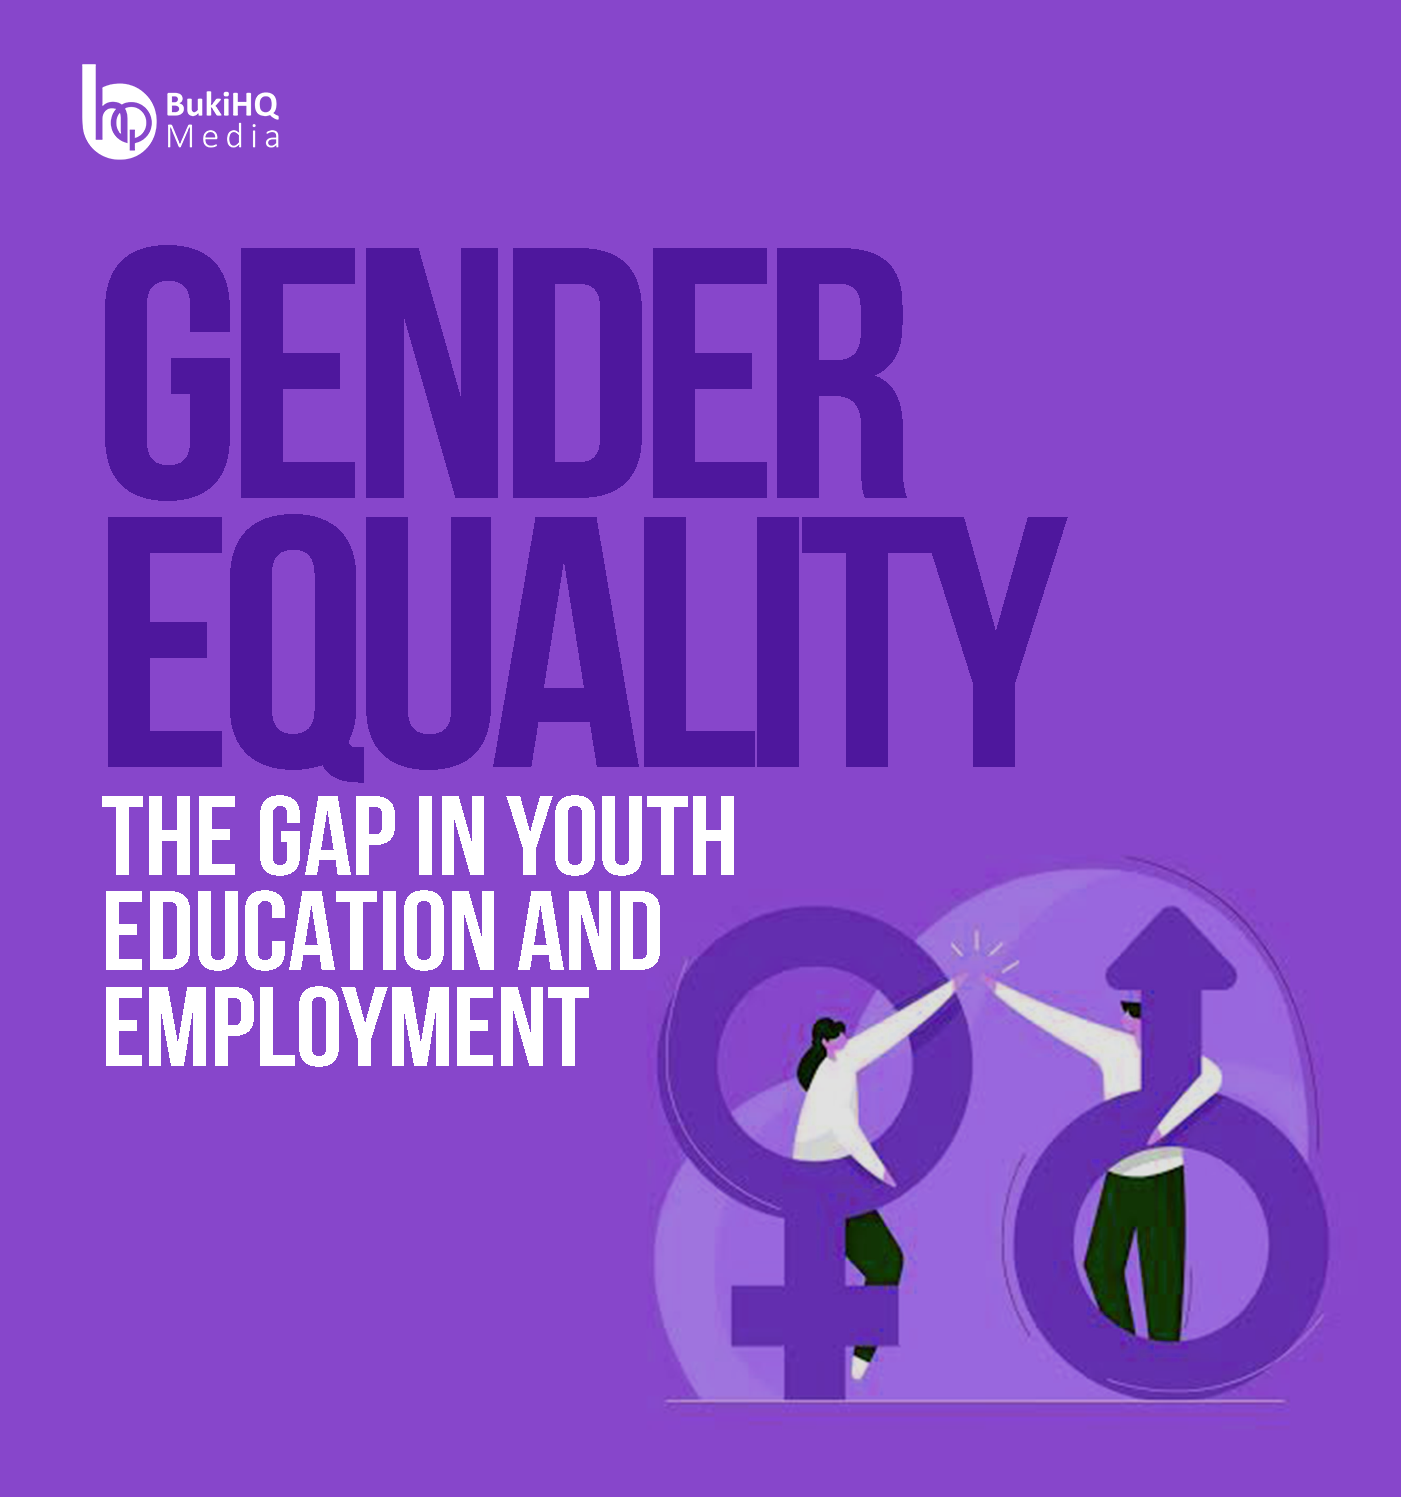 Gender Equality The Gap In Youth Education And Employment Bukihq Media 3129